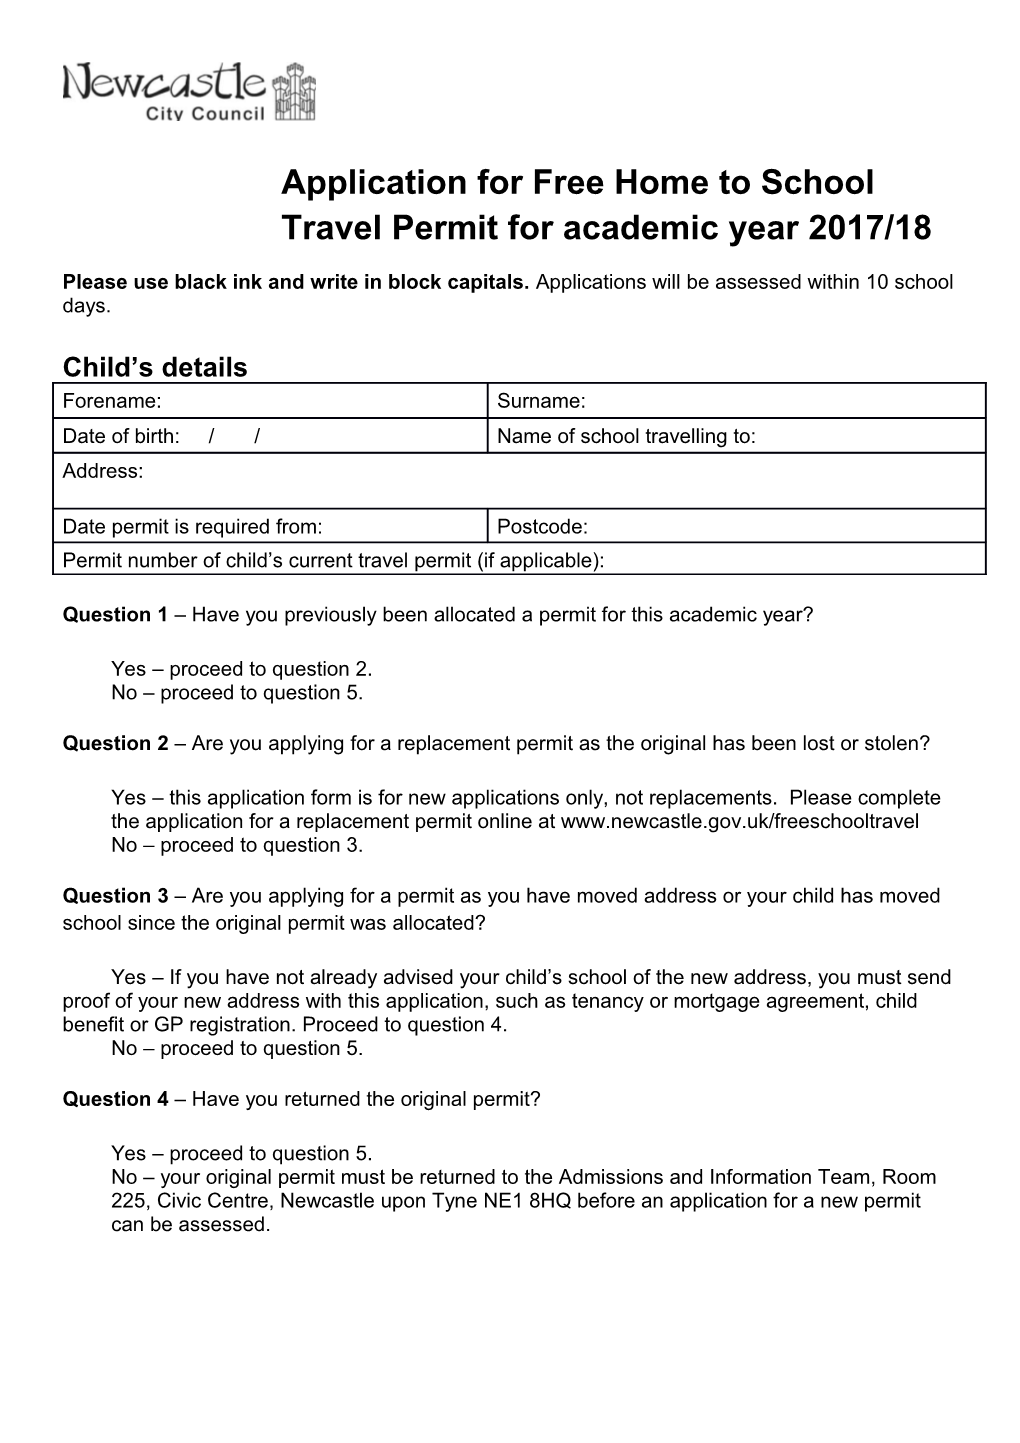 Application for Free Home to School Travel Permit for Academic Year 2017/18